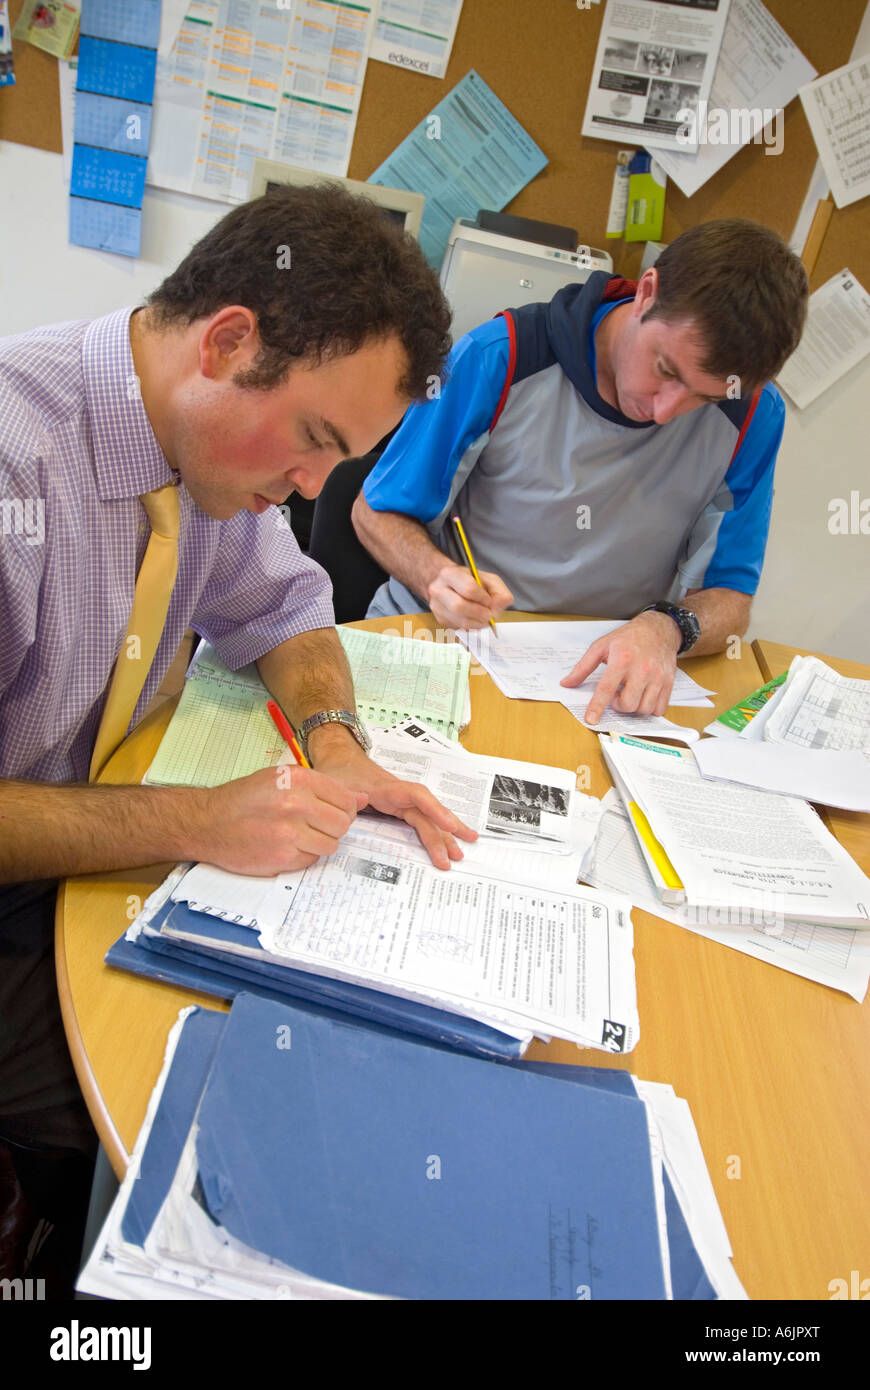 Teachers marking papers in school. Assessing and marking students school exam work in staff room at school facility Stock Photo